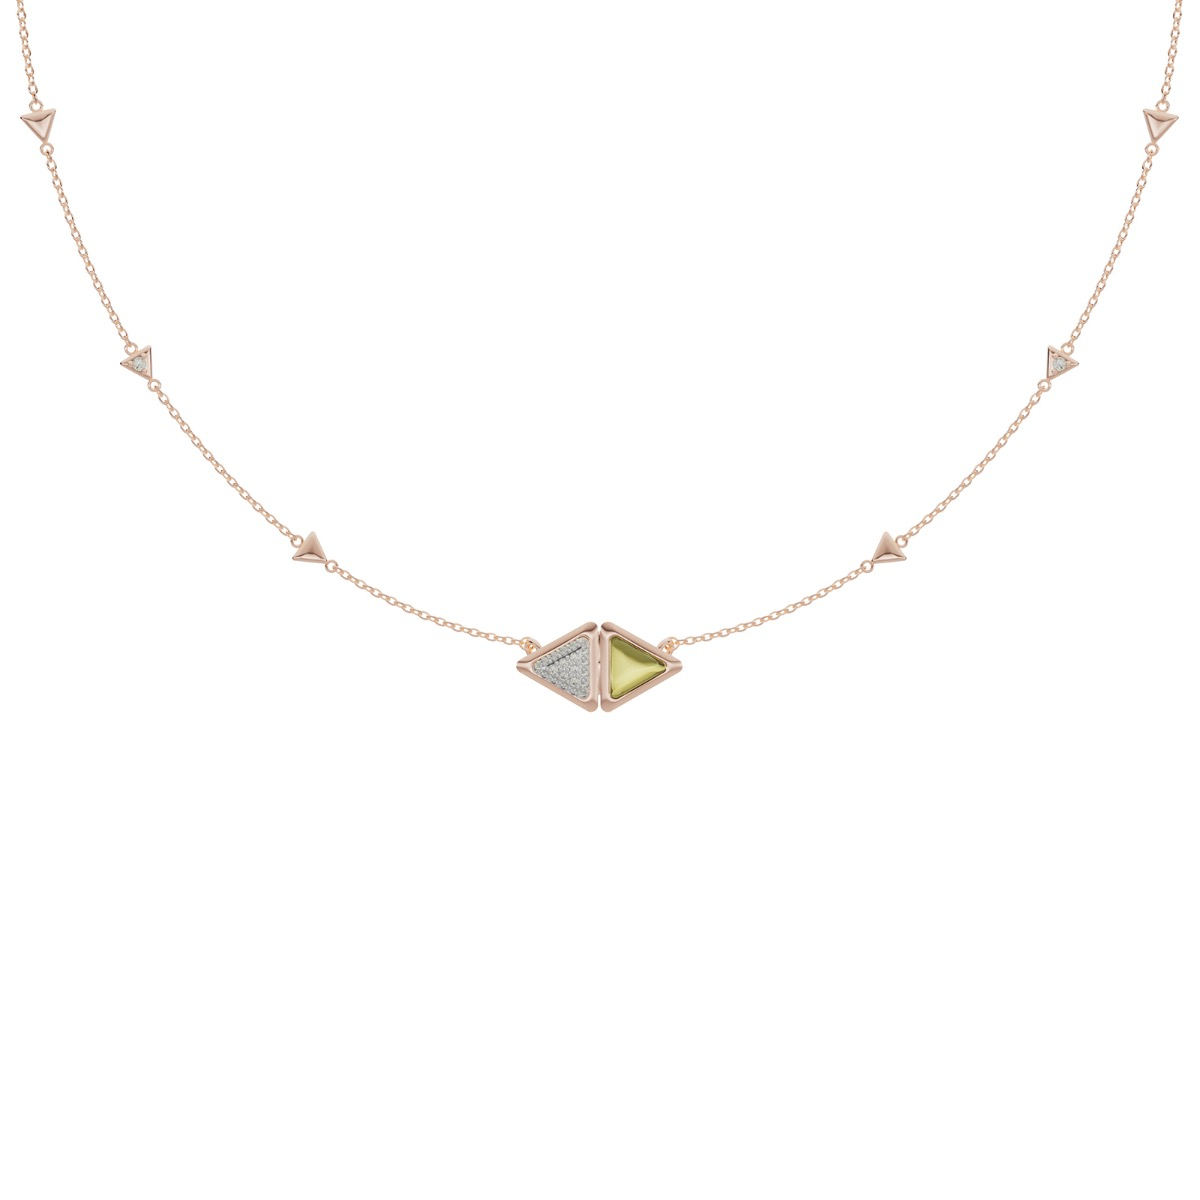 Necklace Mirror Exquisite Rose Gold  Green Tourmaline and Diamonds